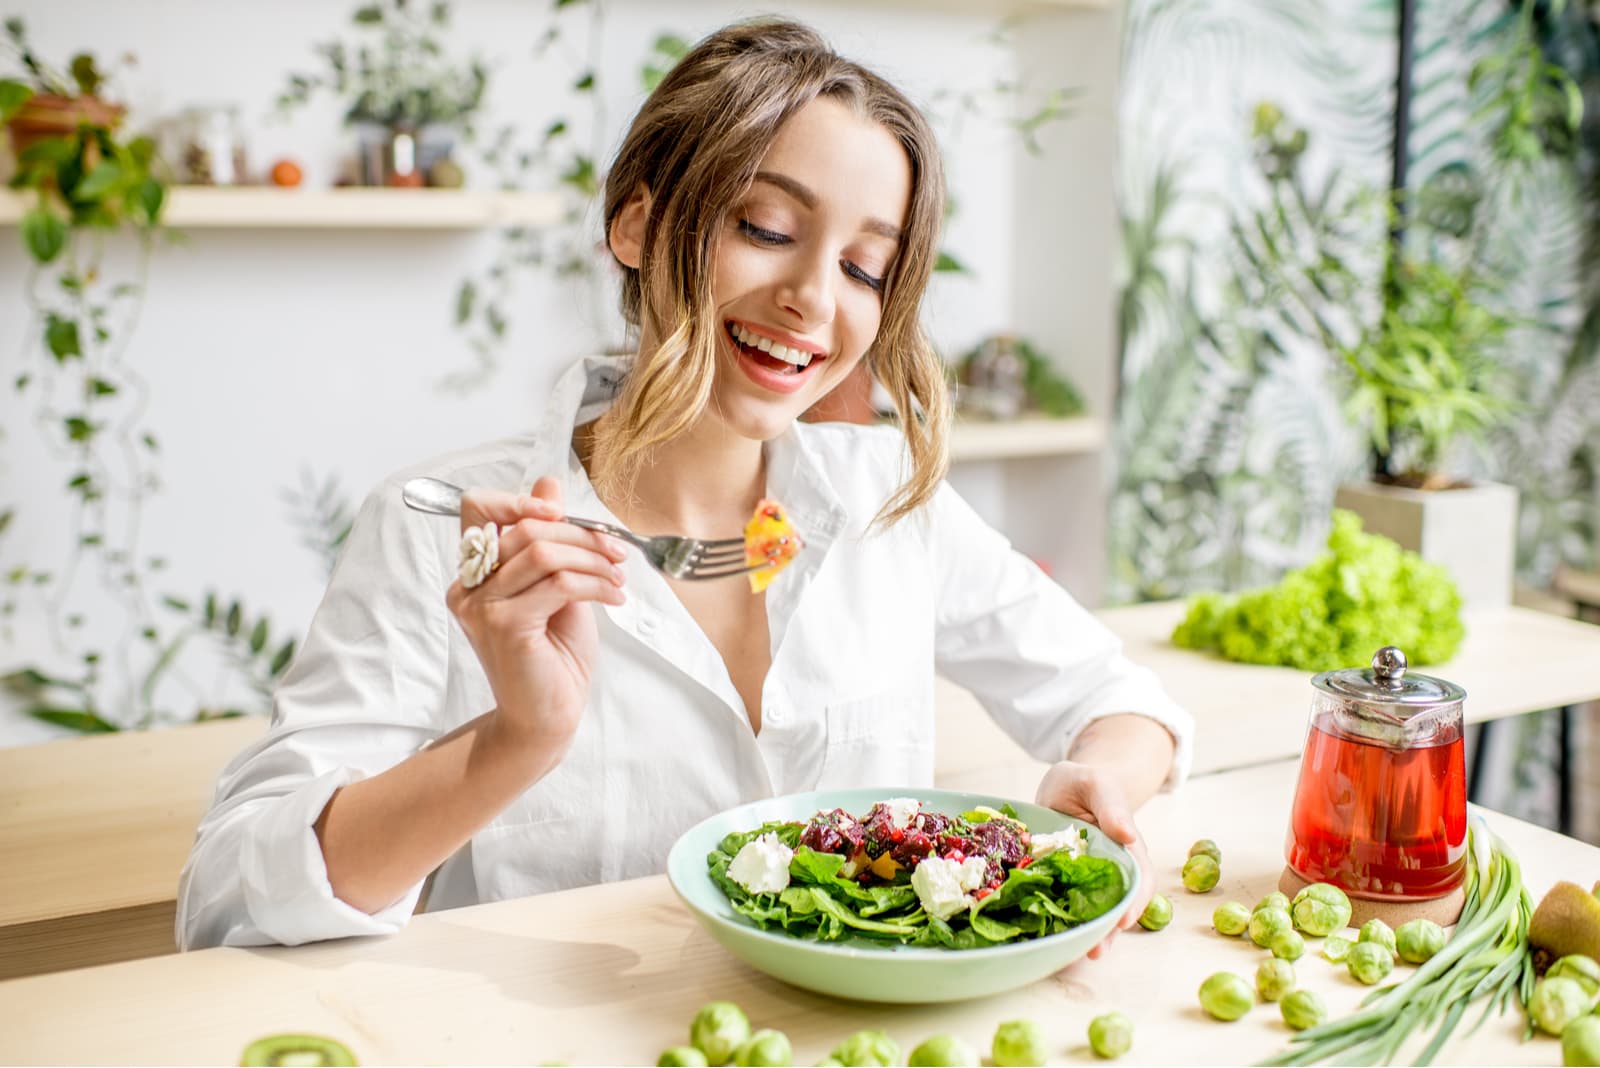 happy woman eating a salad